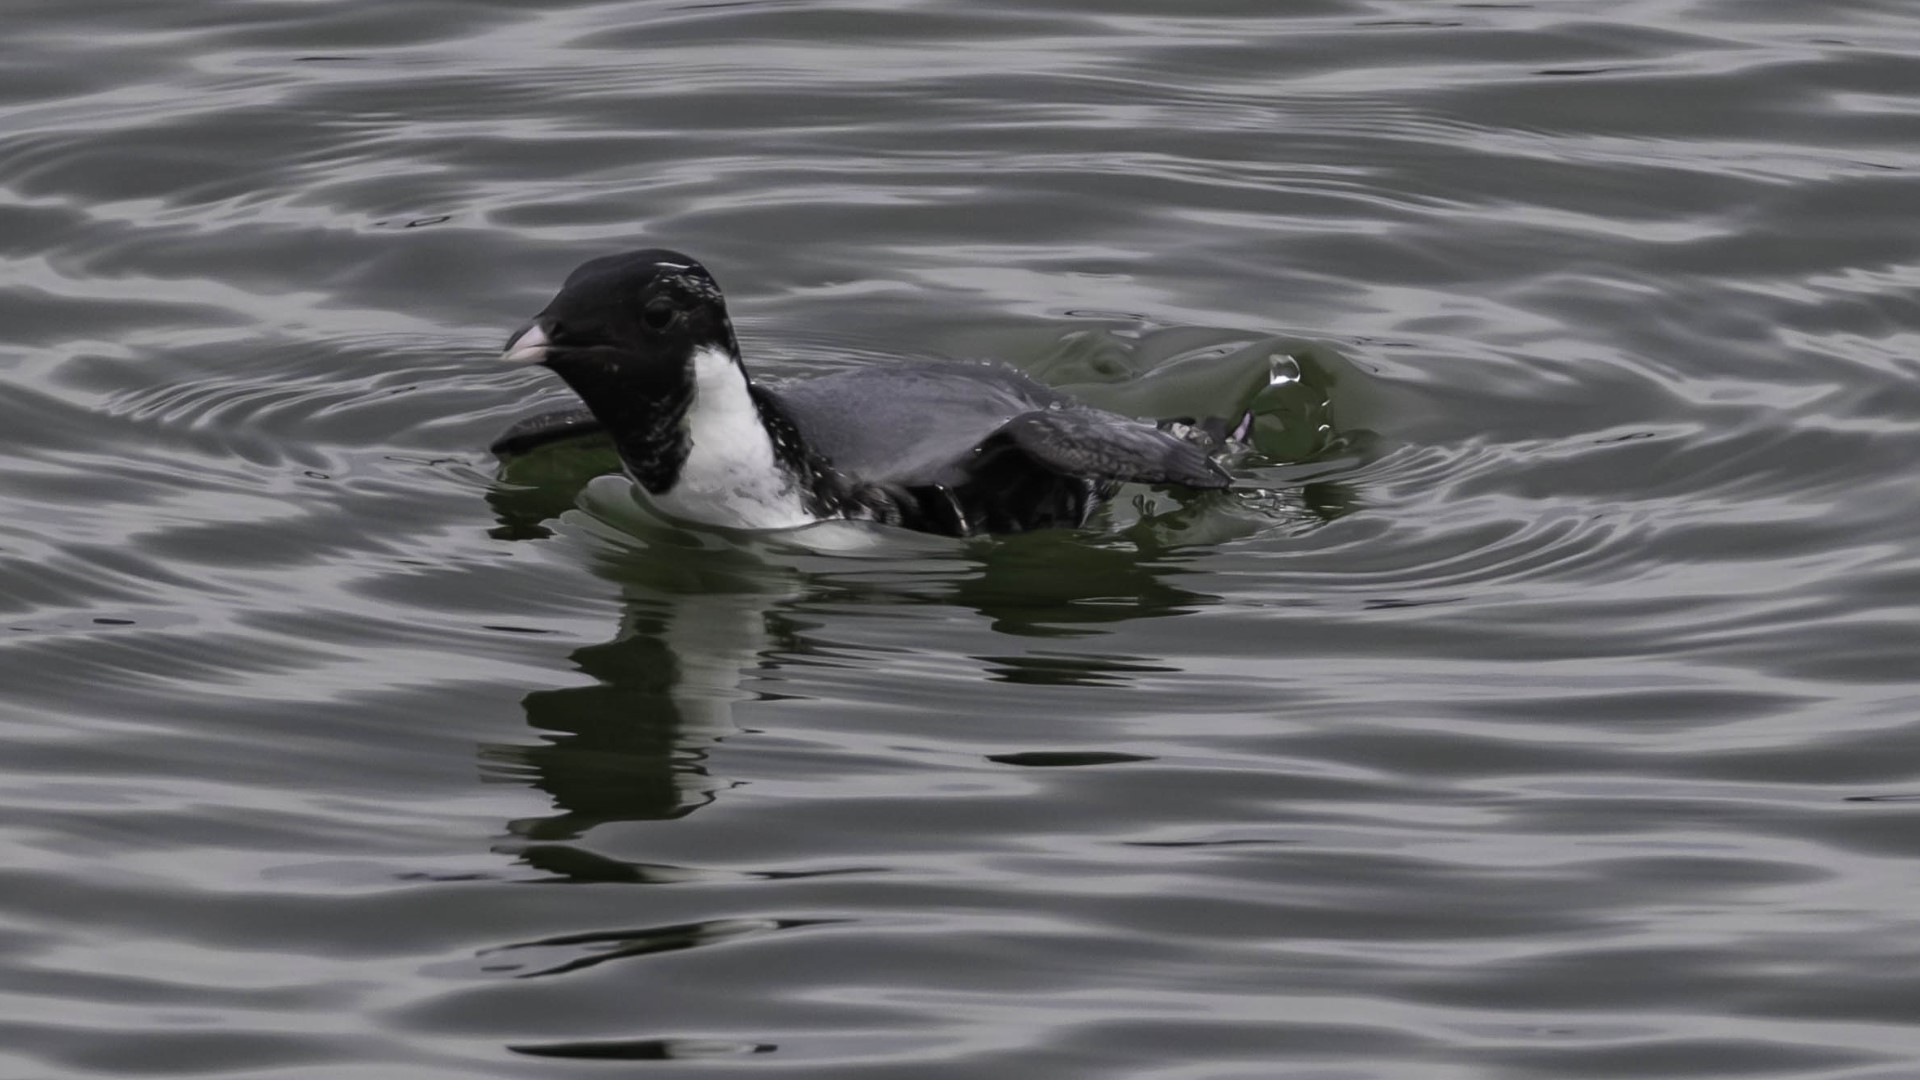 The ancient murrelet, native to Alaska, was spotted in Tennessee for the first time.